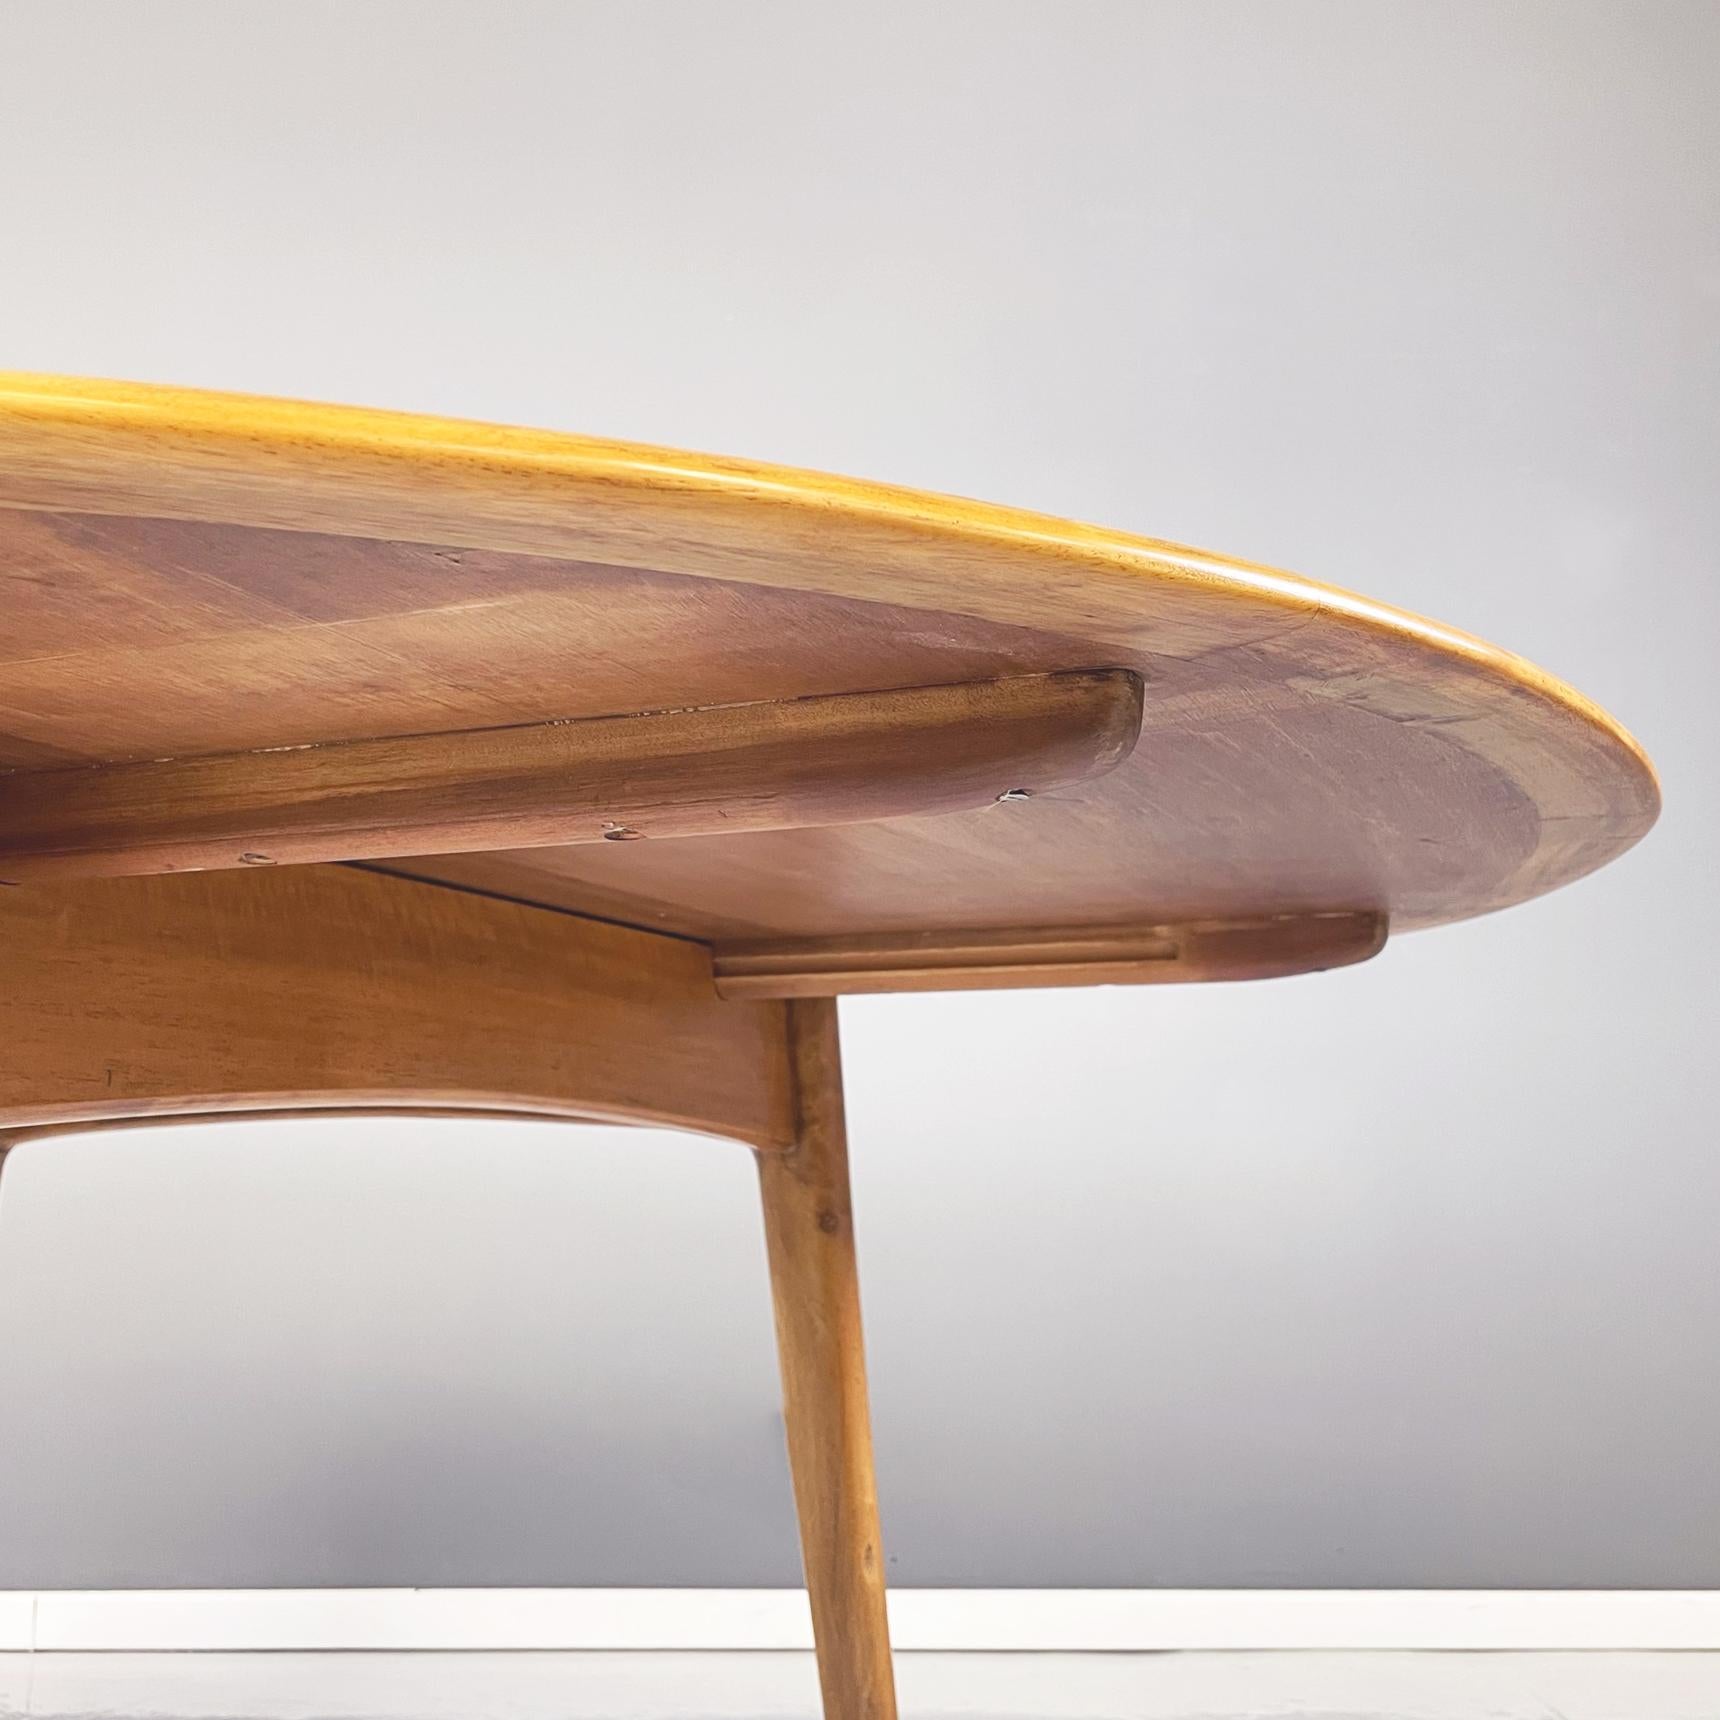 North Europa Midcentury Oval Round Wooden Dining Table with Extensions, 1960s For Sale 7